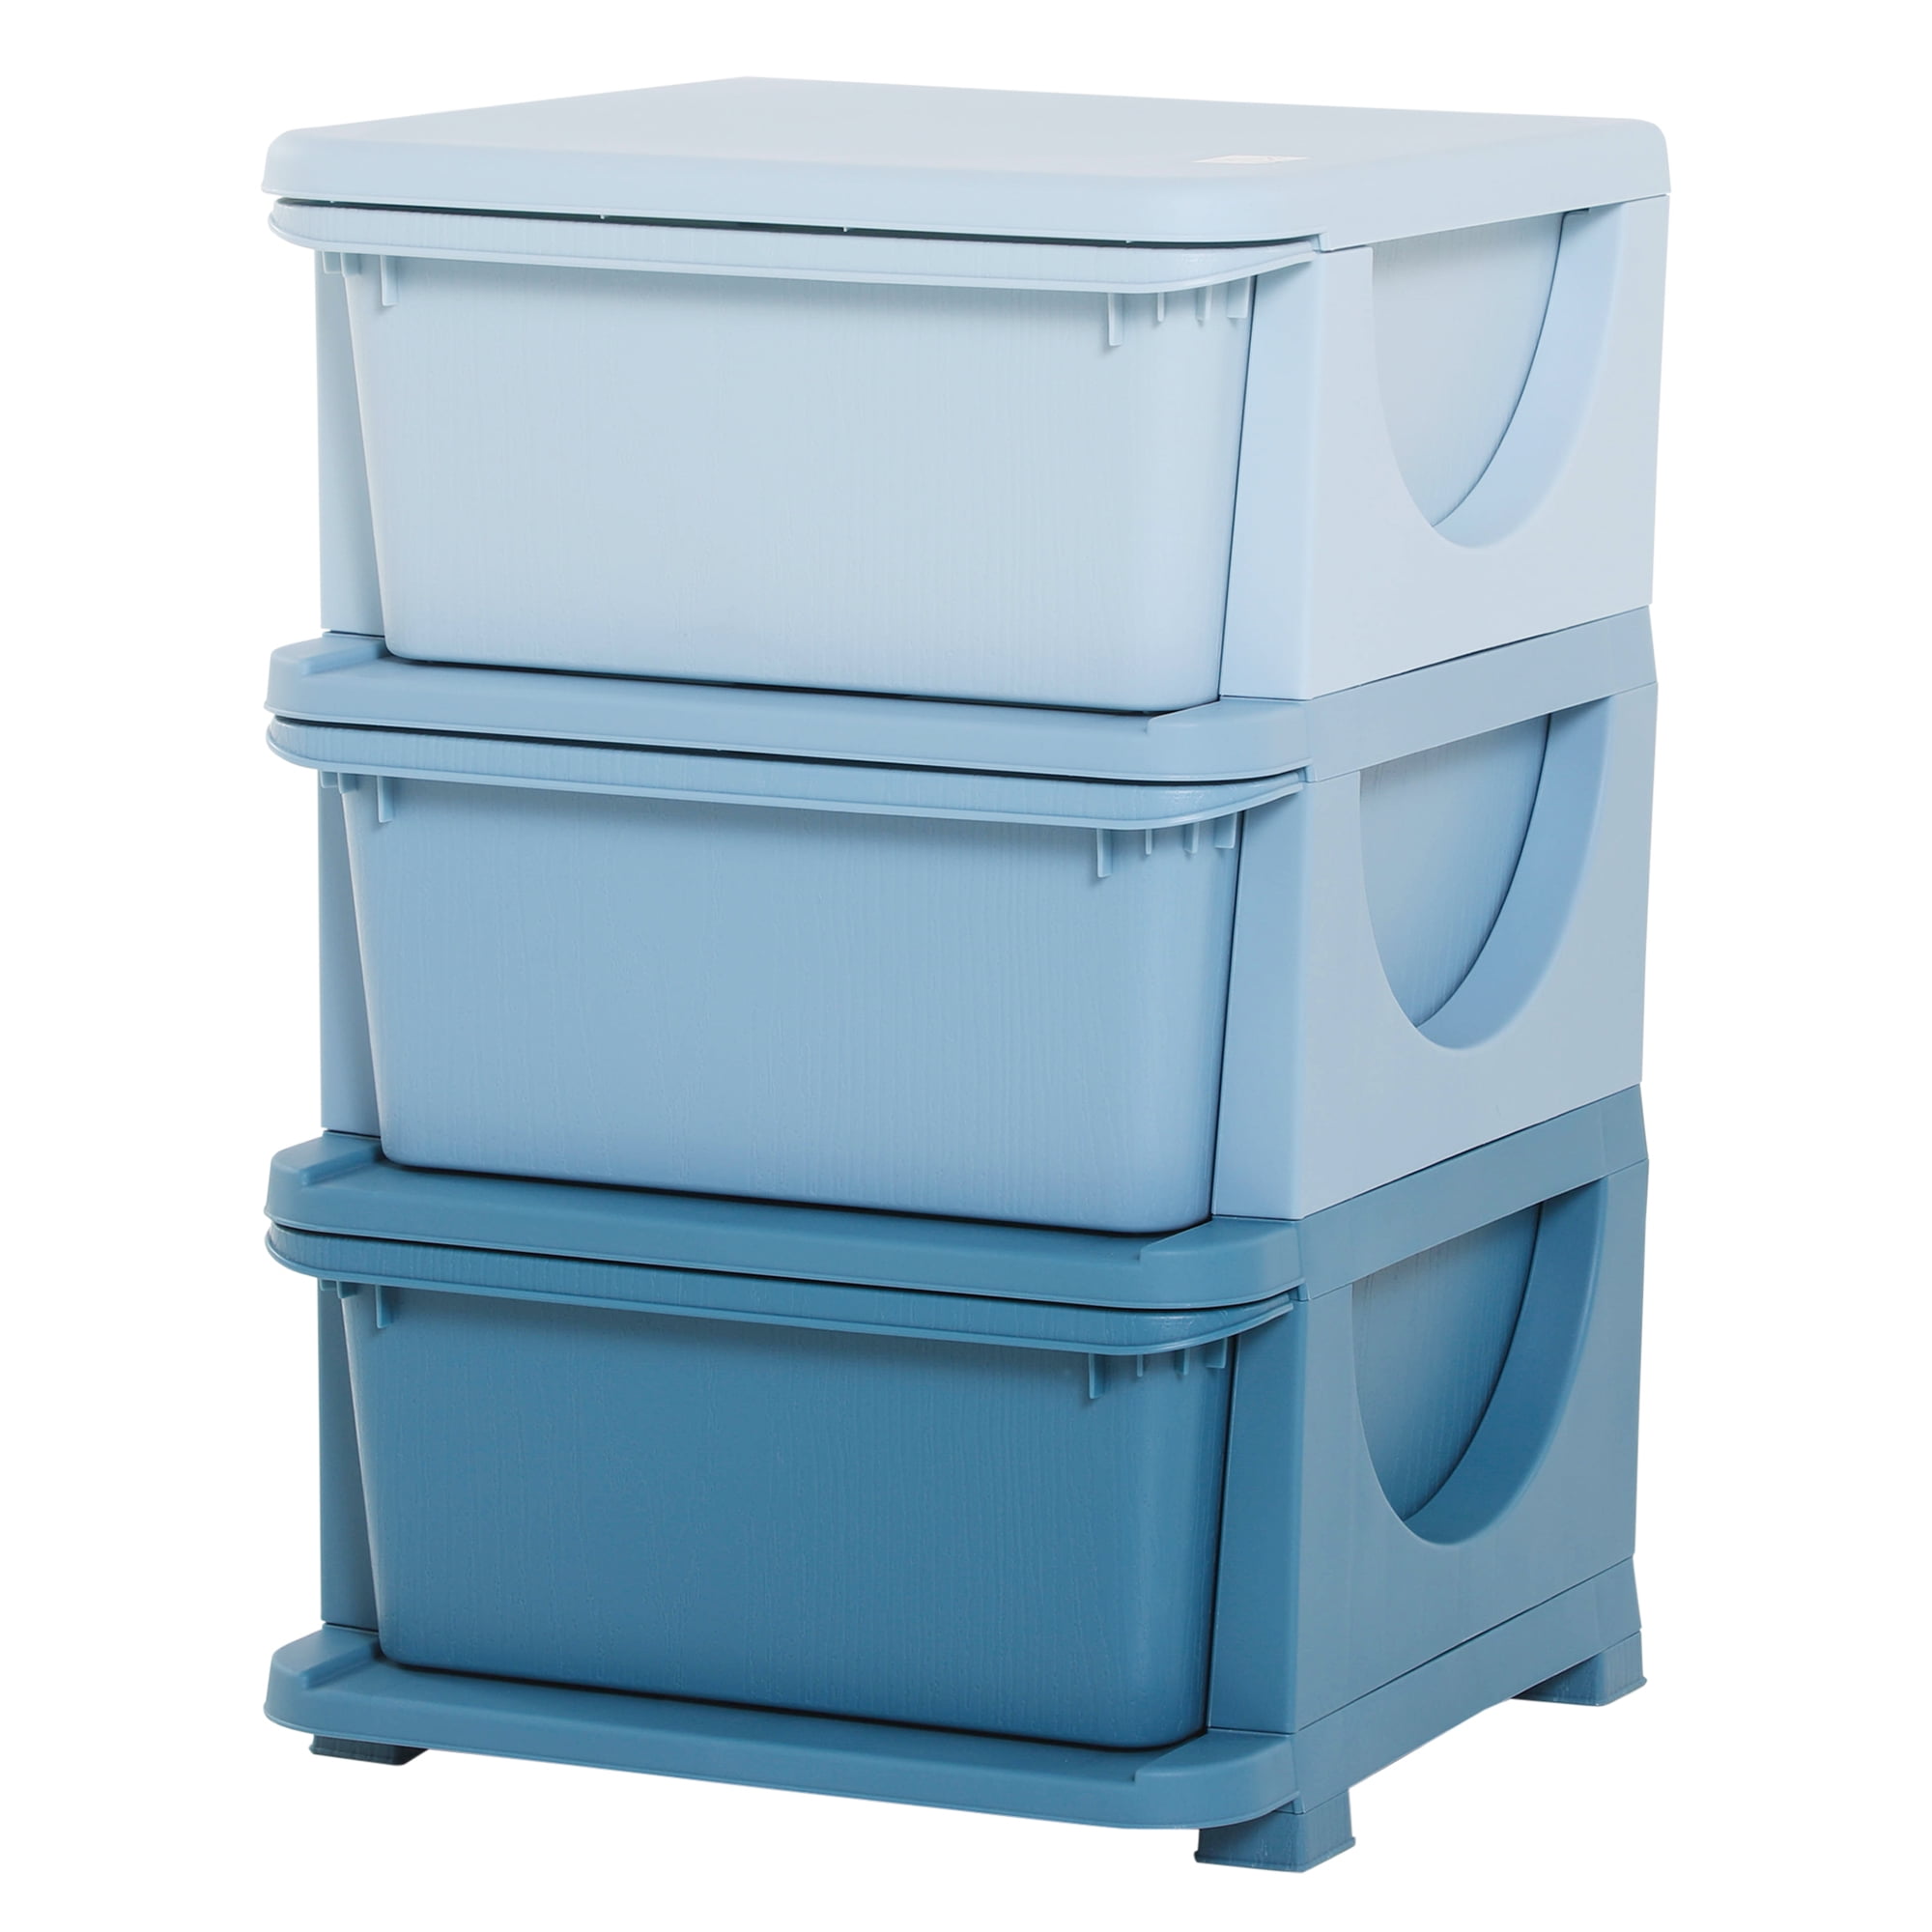 KIDS BLUE PLASTIC LARGE 52L LITRE STORAGE BOX TUB CONTAINER WITH LID  TOY BOX 